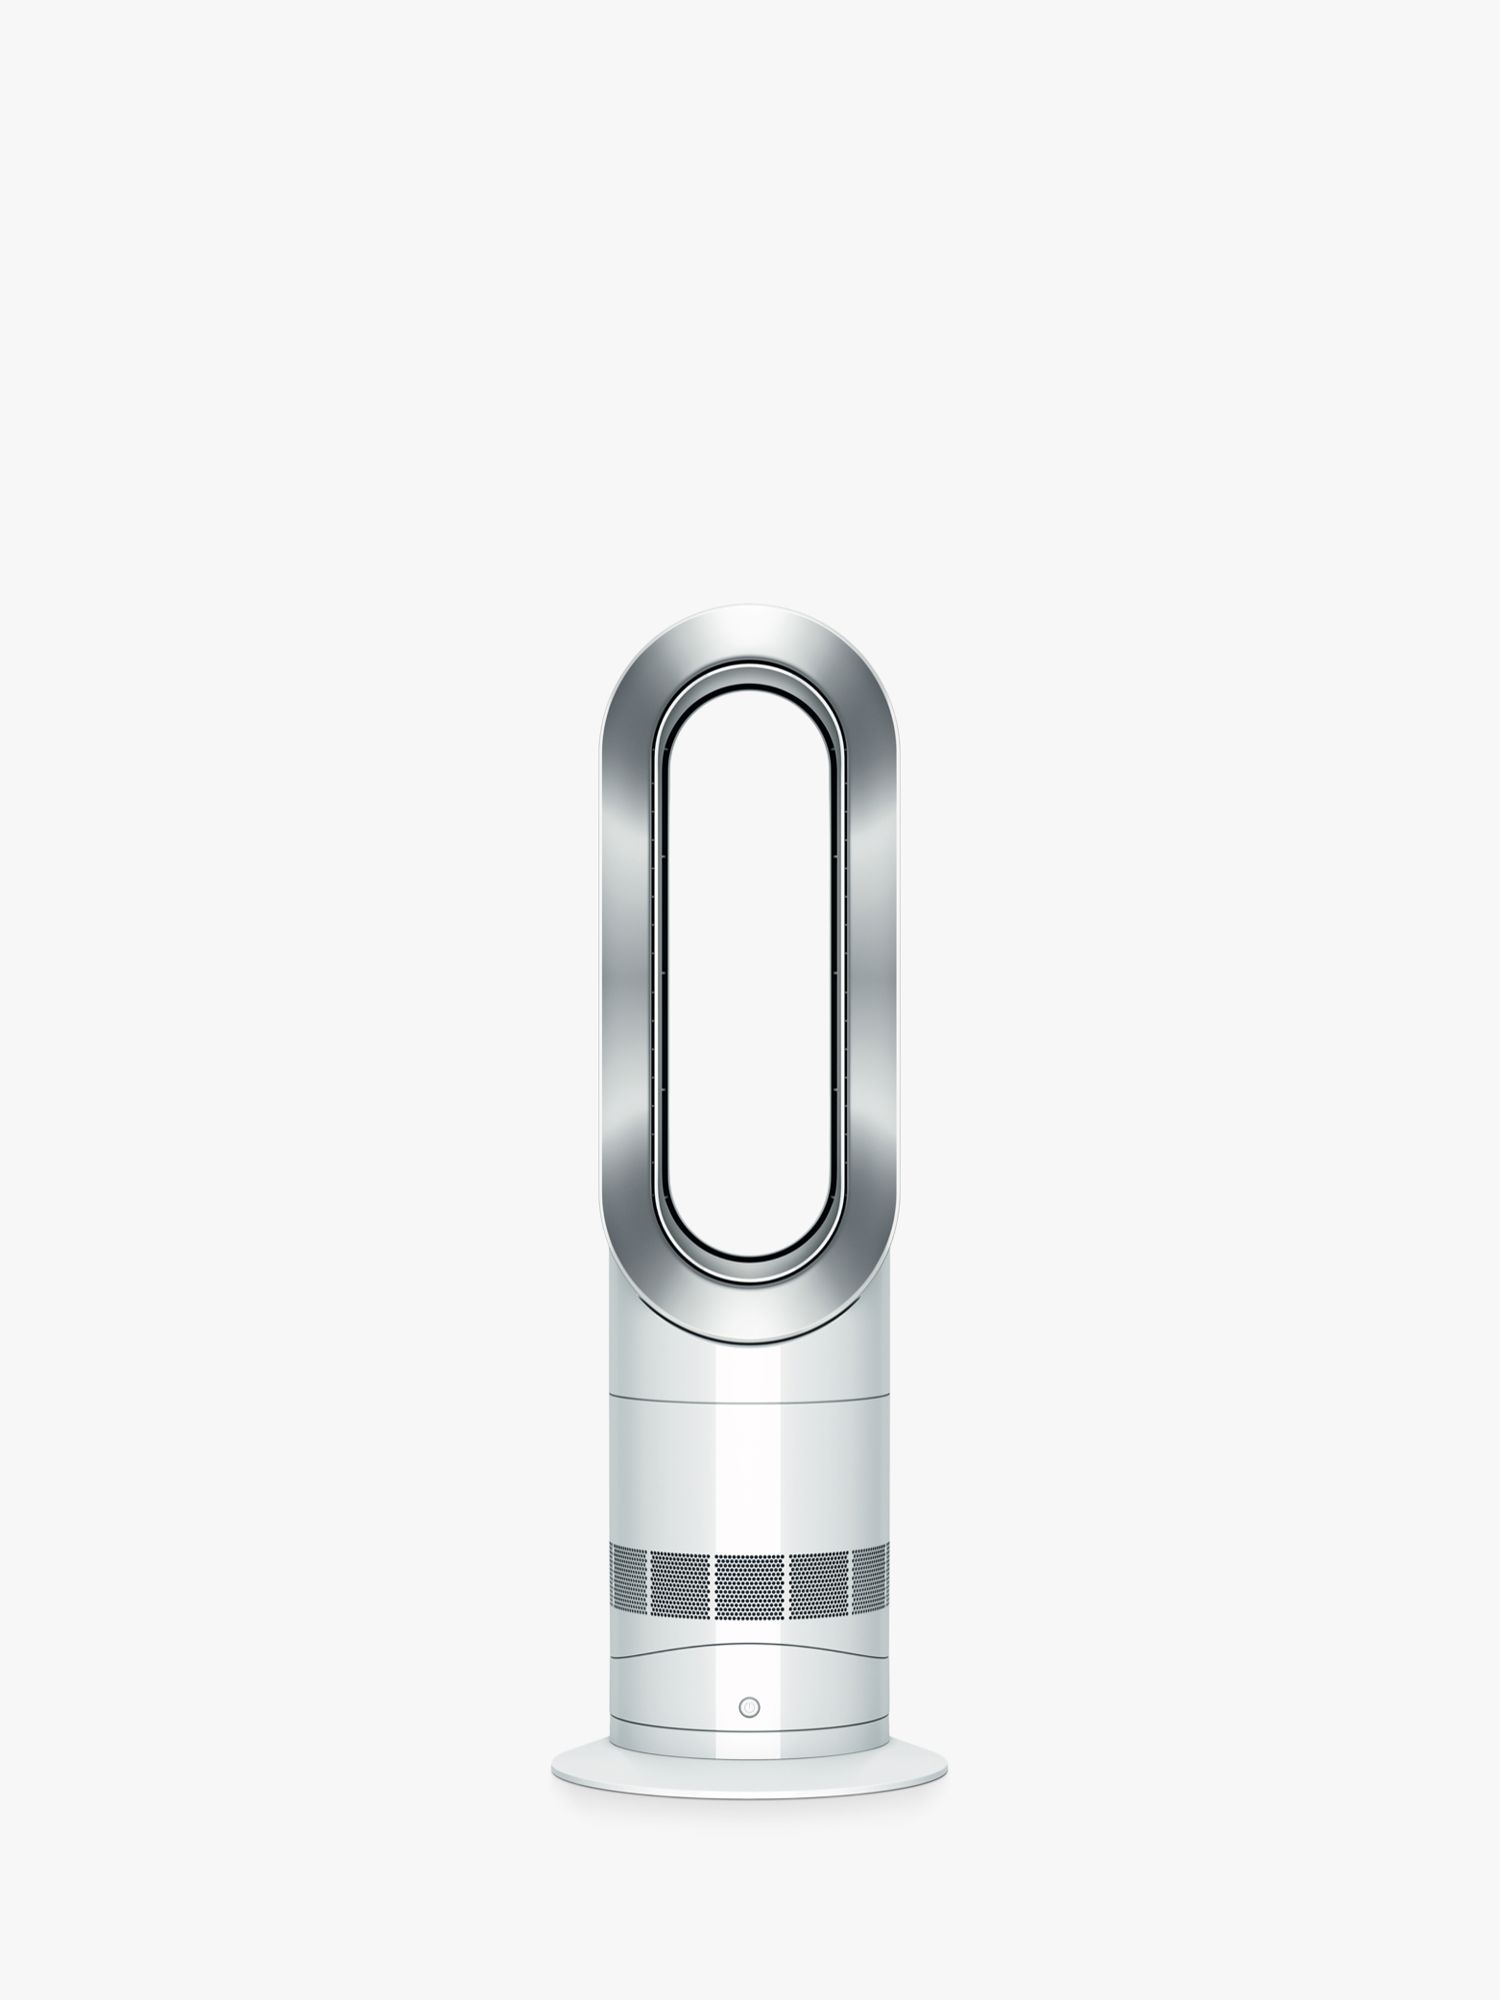 Buy Dyson AM09 Hot + Cool Fan Heater, White / Nickel Online at johnlewis.com